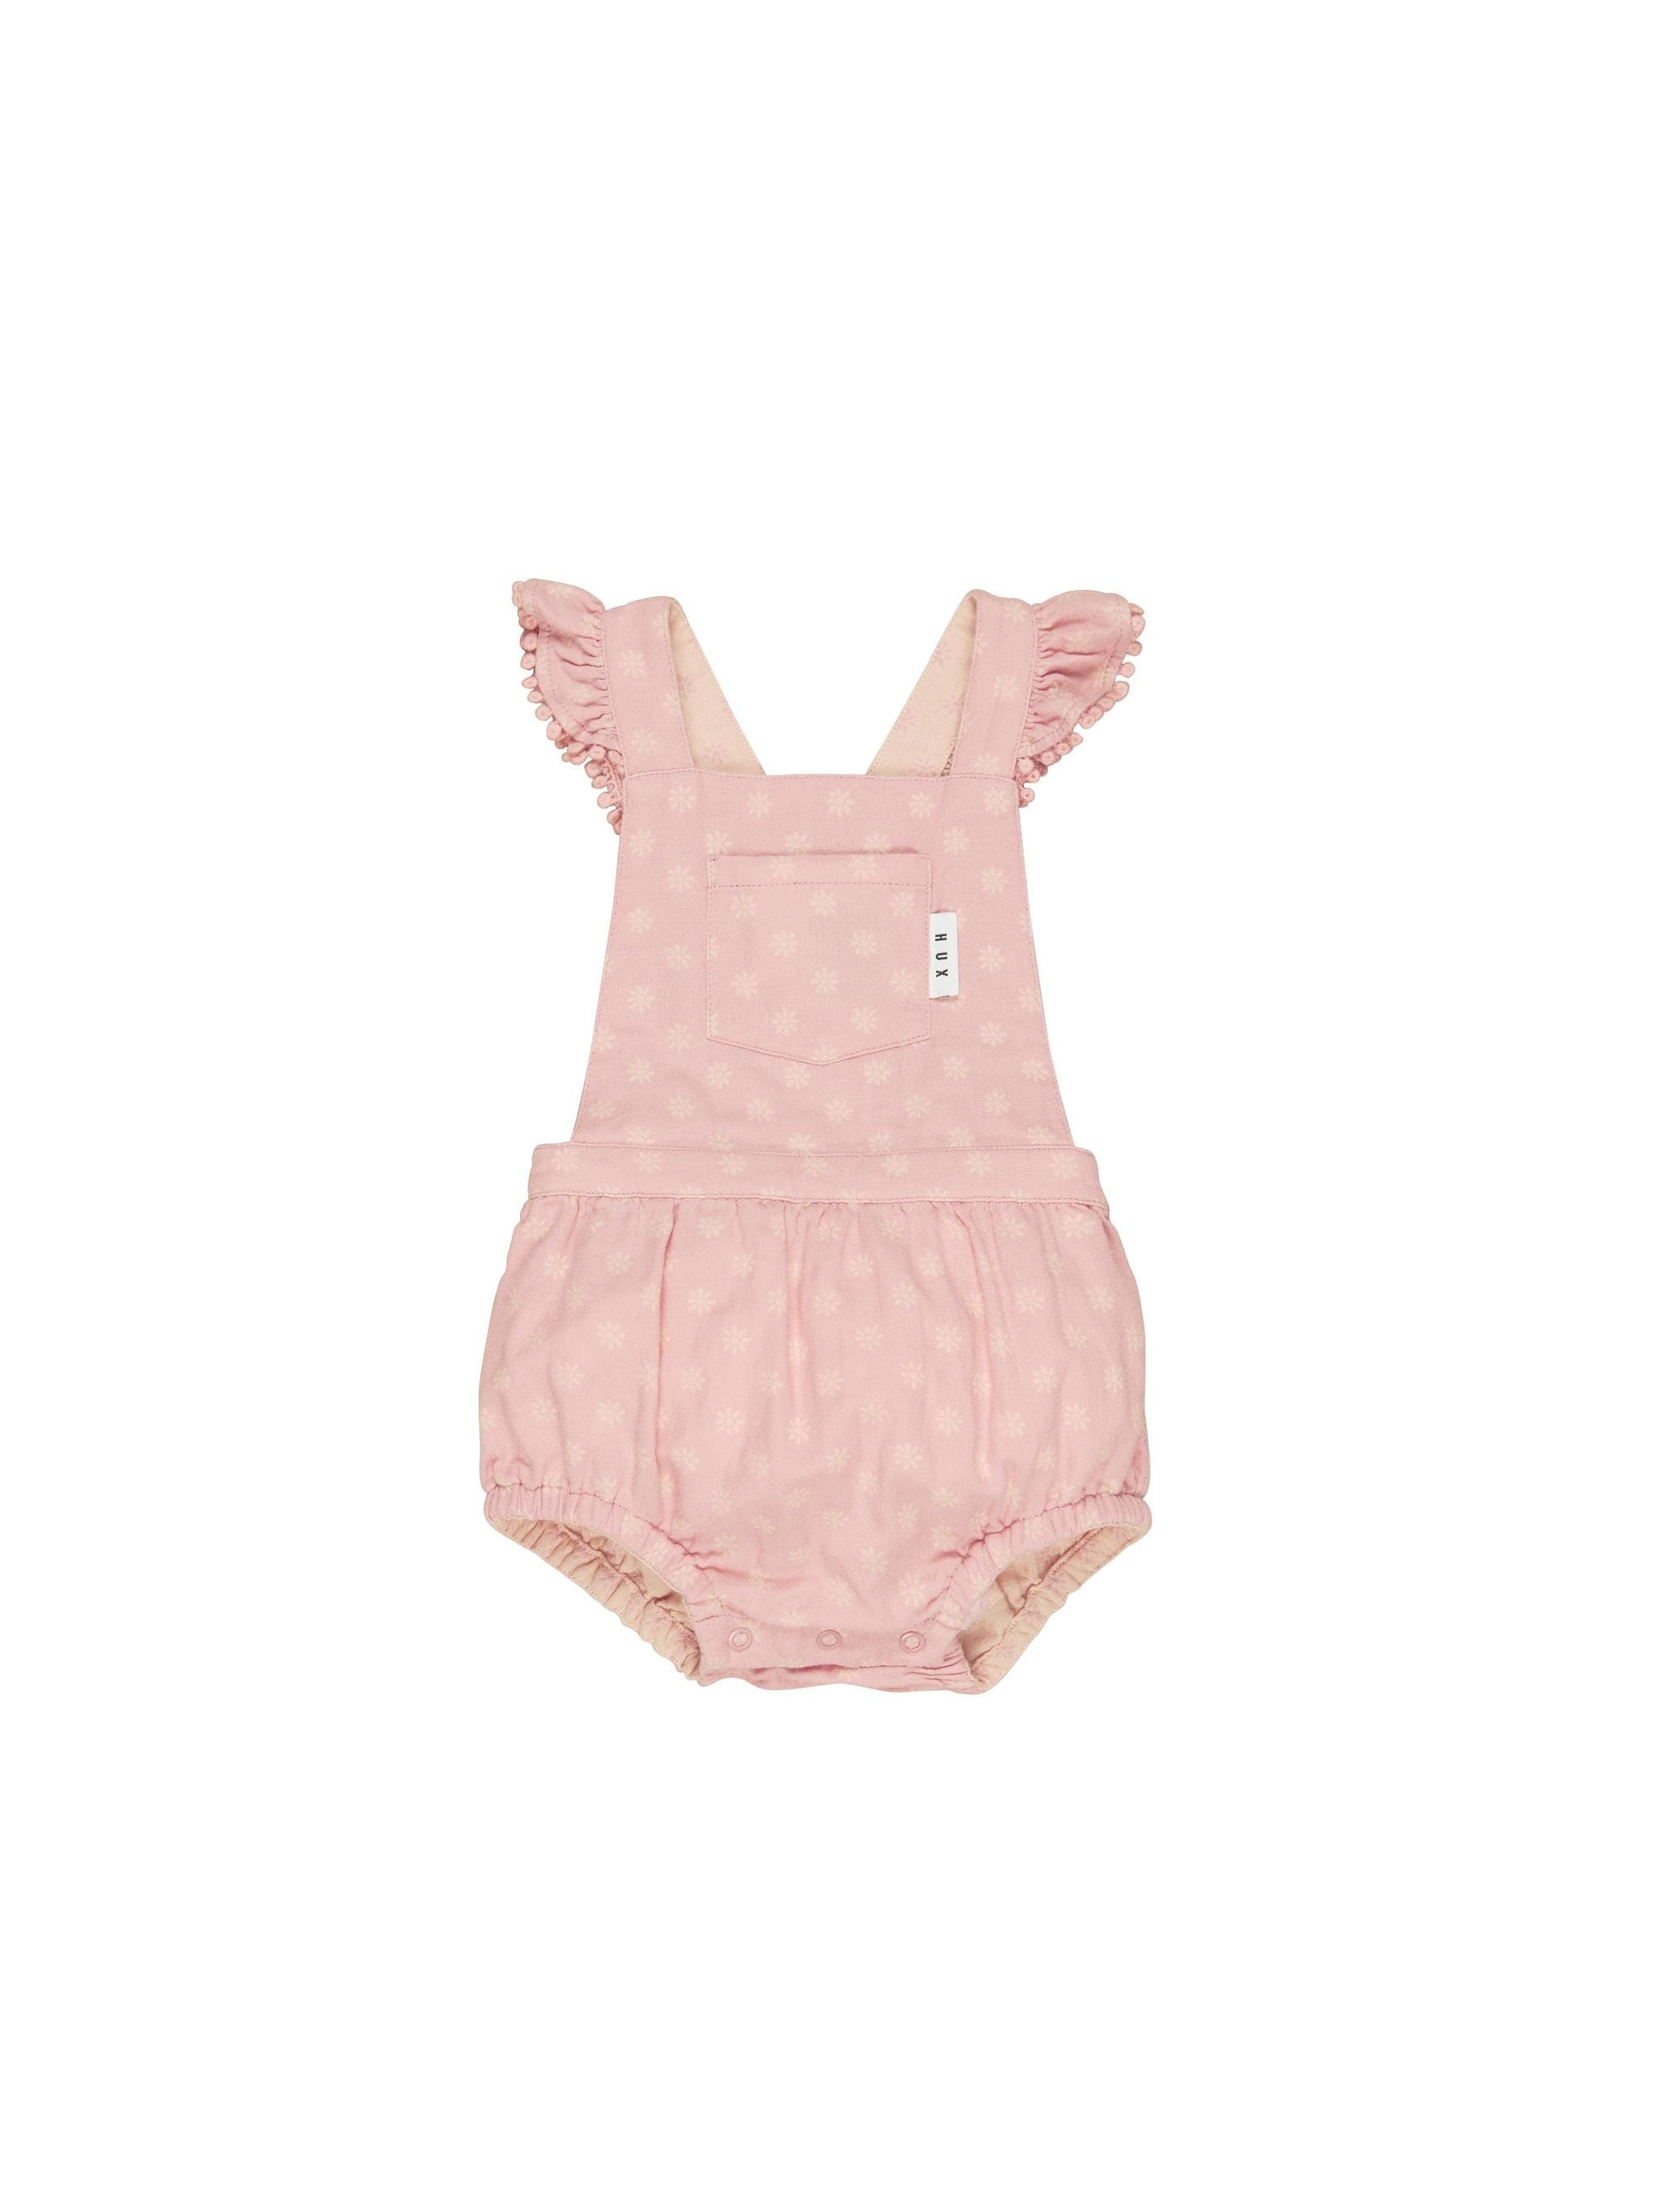 Huxbaby Girls All In One Daisy Reversible Playsuit